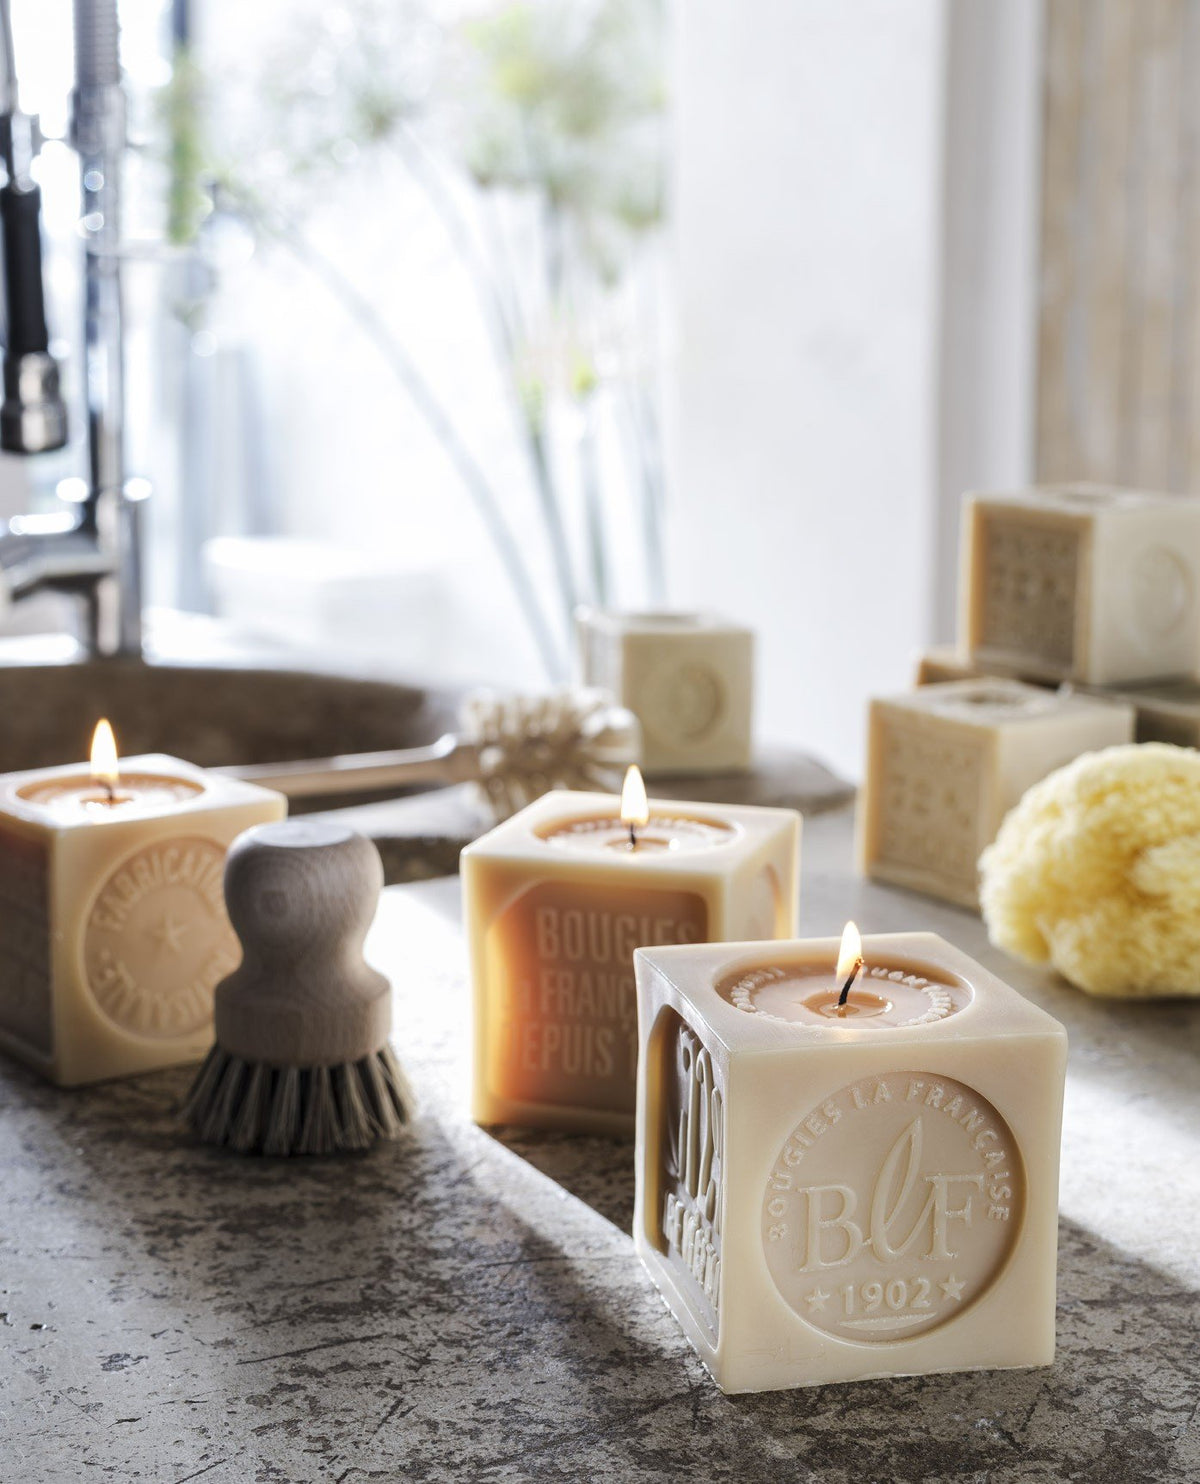 Three lit square candles with embossed lettering on a bathroom vanity, complemented by a sponge and toiletries, including a Bougies la Française Marseille Soap Decorative Candle, in a serene setting with natural light.